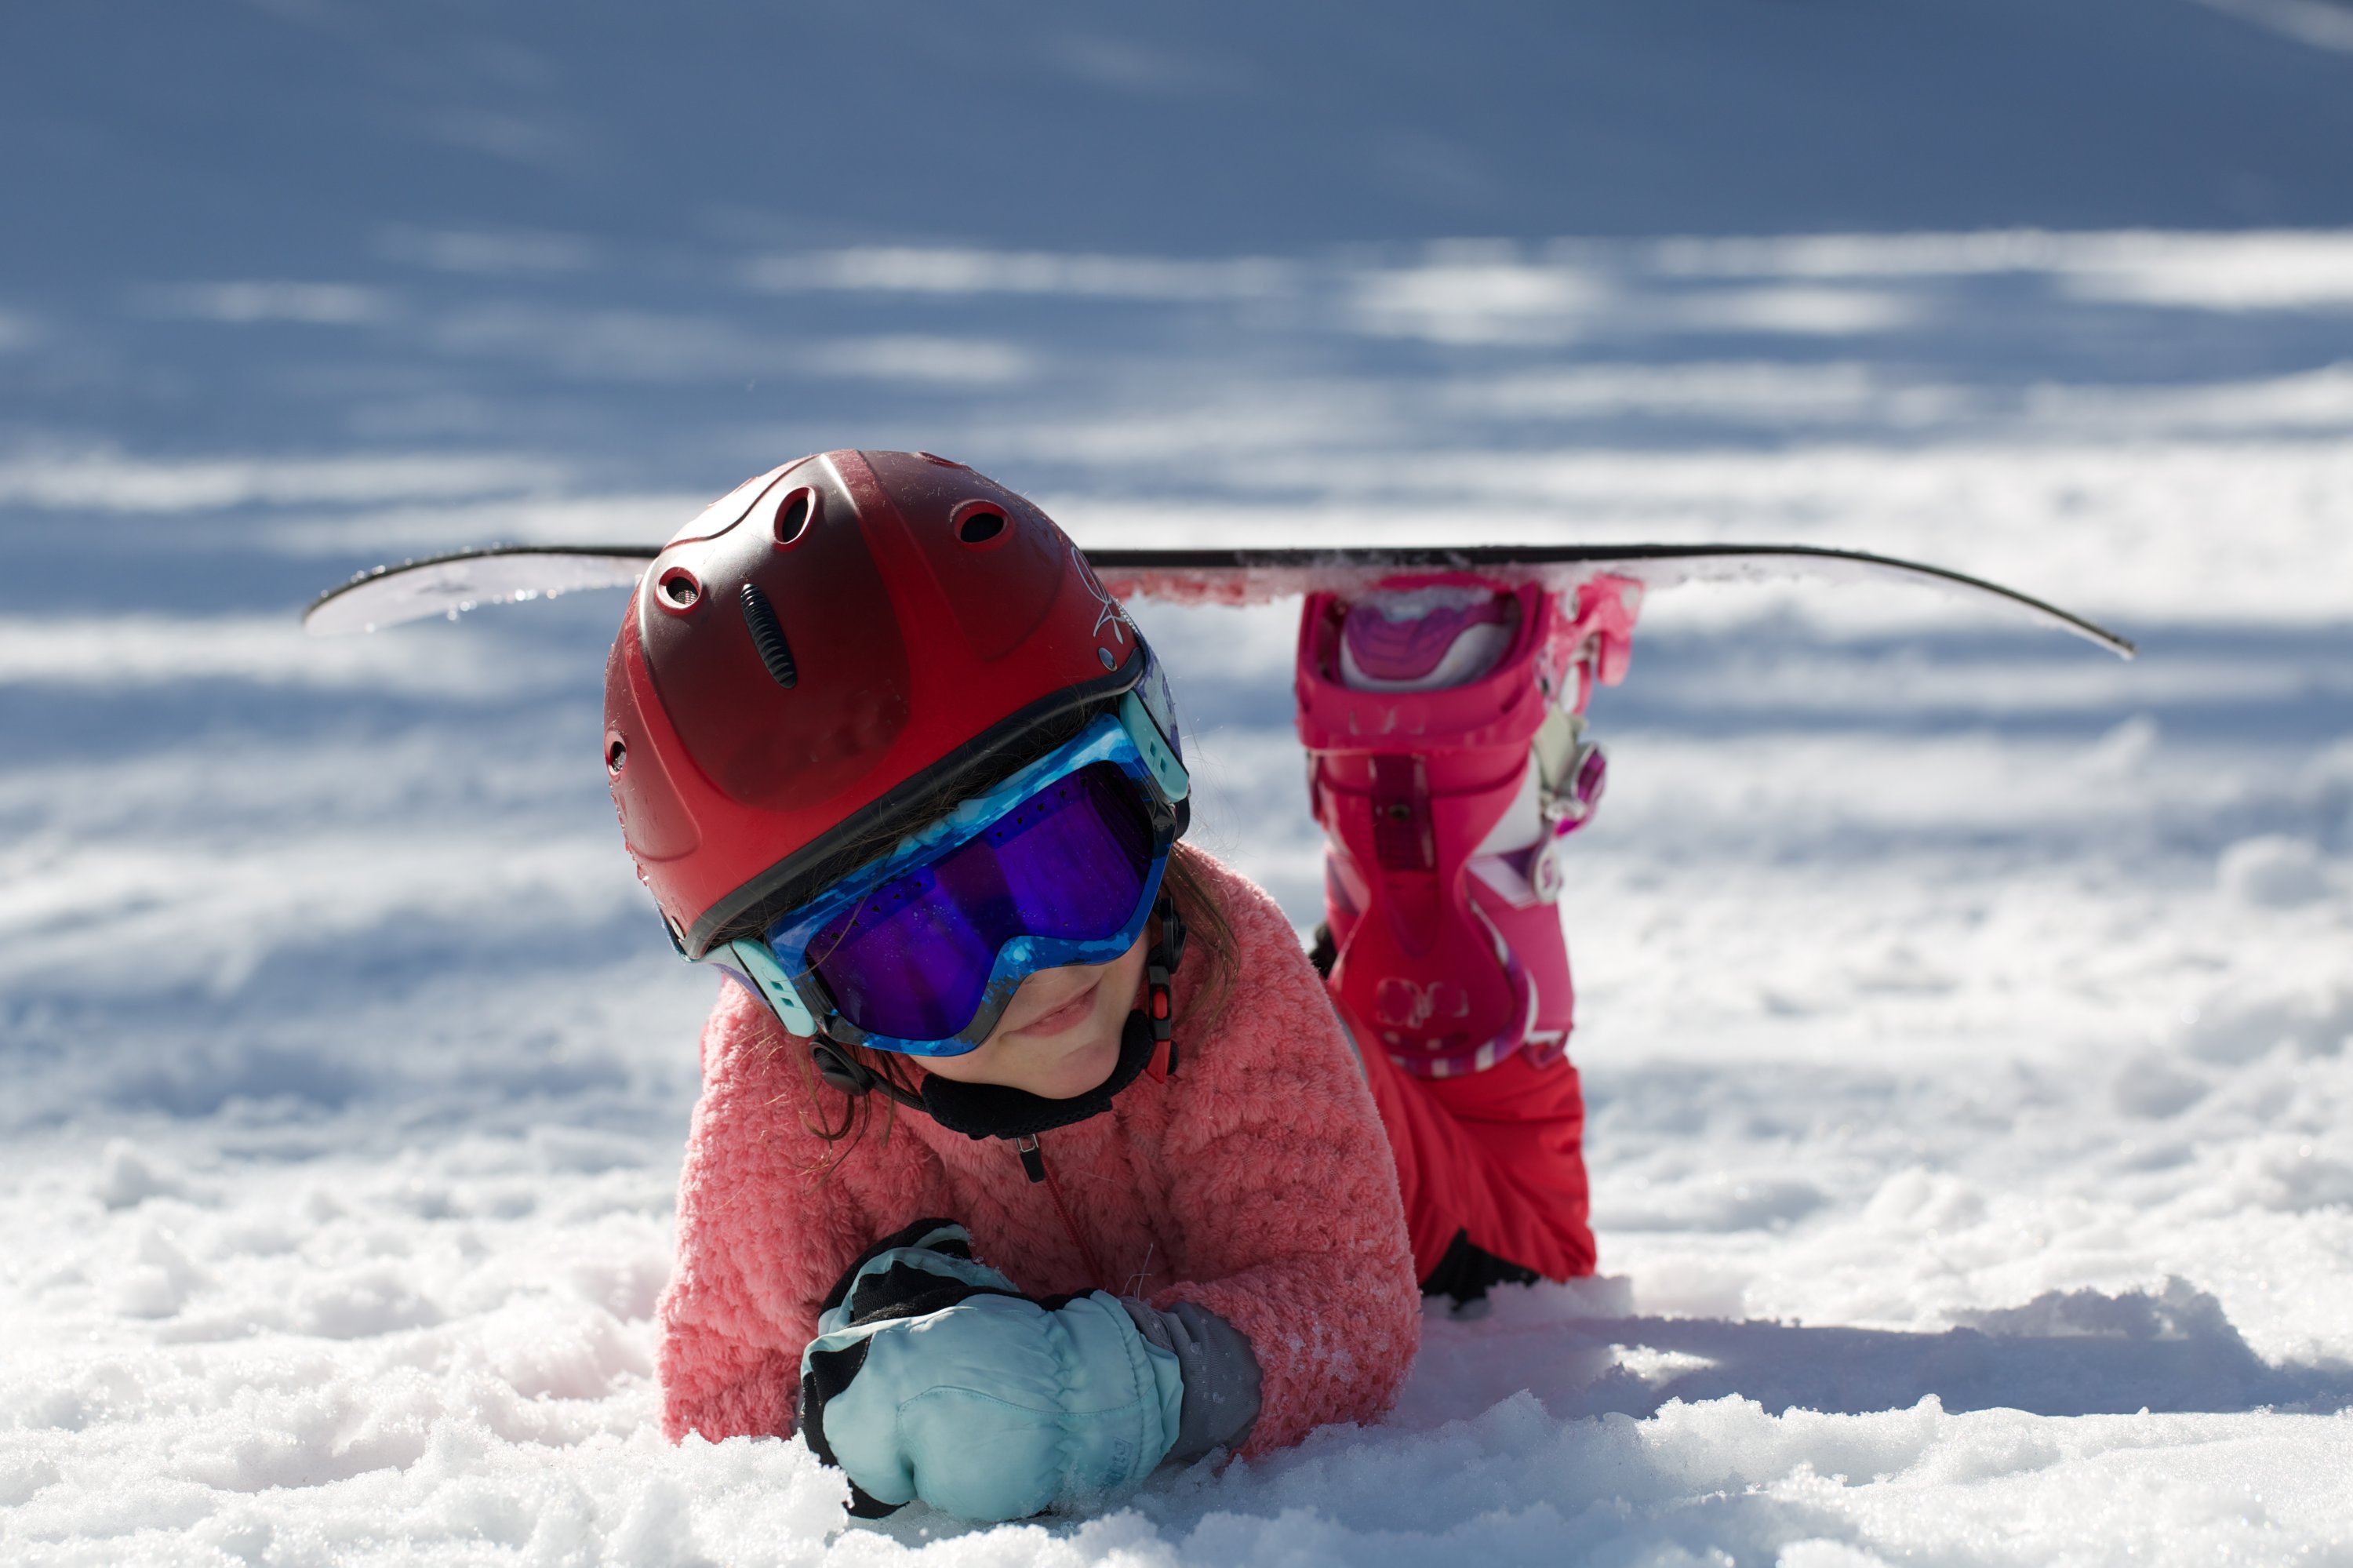 Skiing experts say parents can do their children a favor by teaching them quite early. (Shutterstock Photo) 